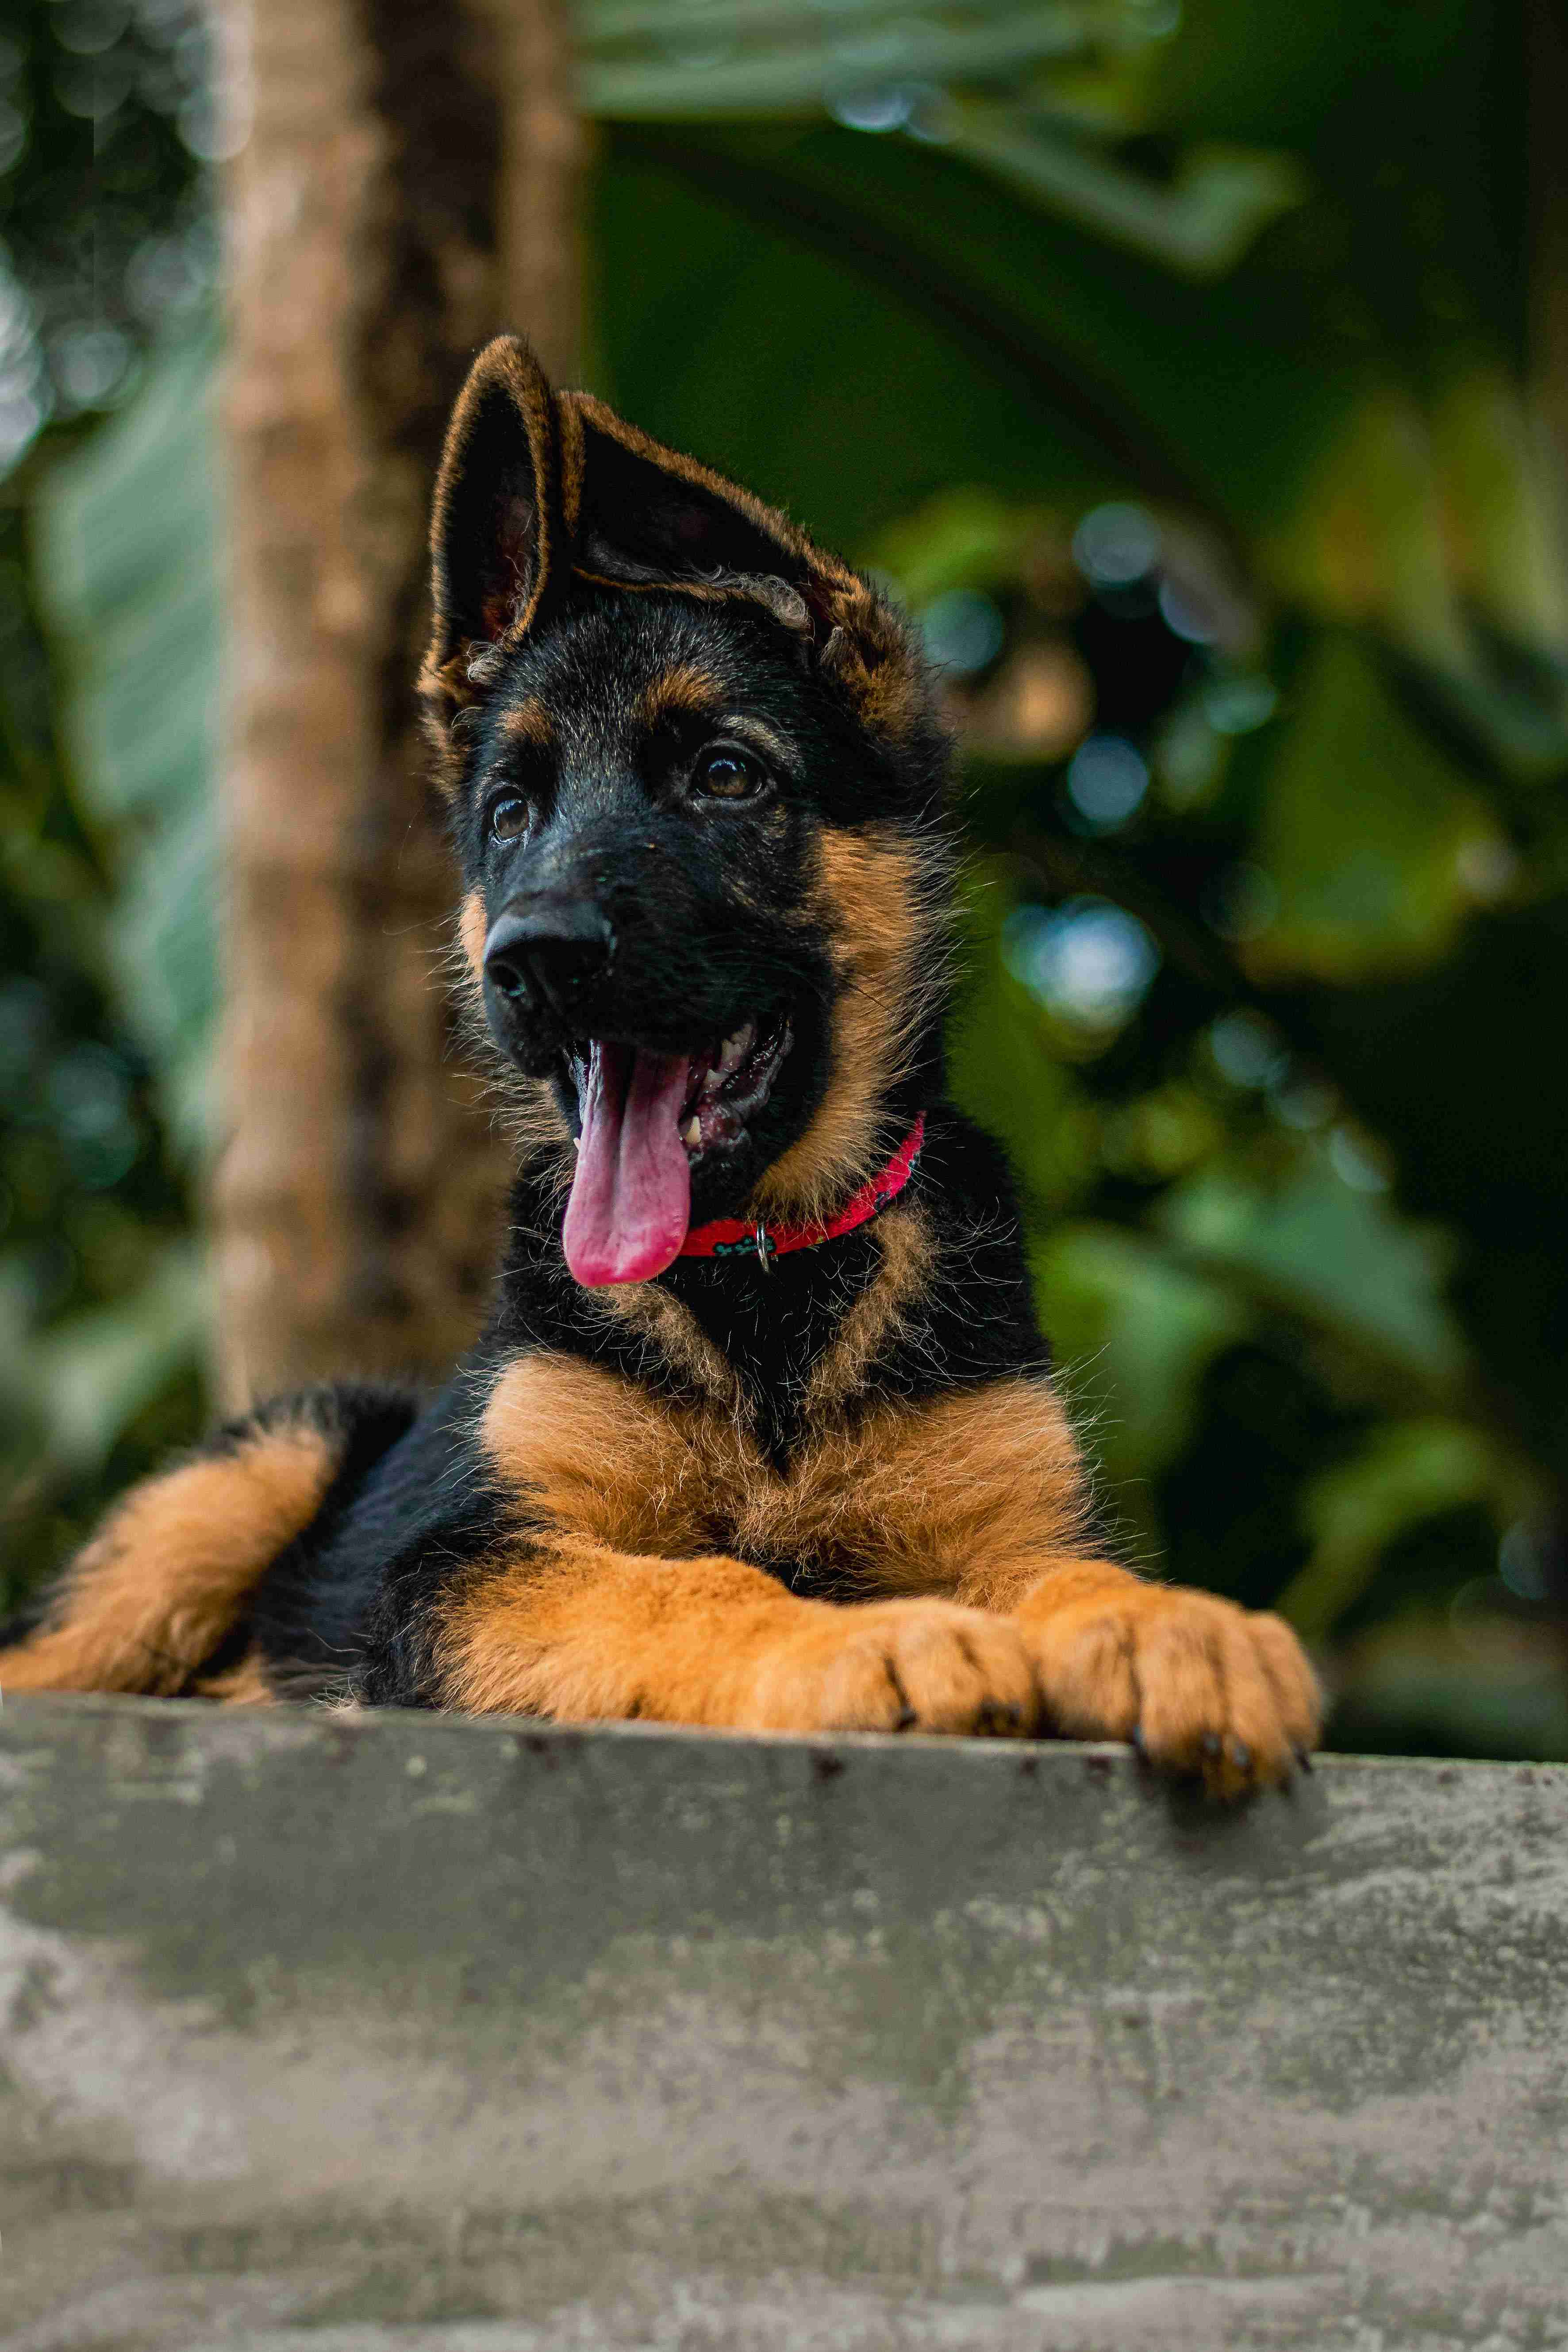 What are some good ways to teach a German Shepherd puppy to not be afraid of teeth brushing?